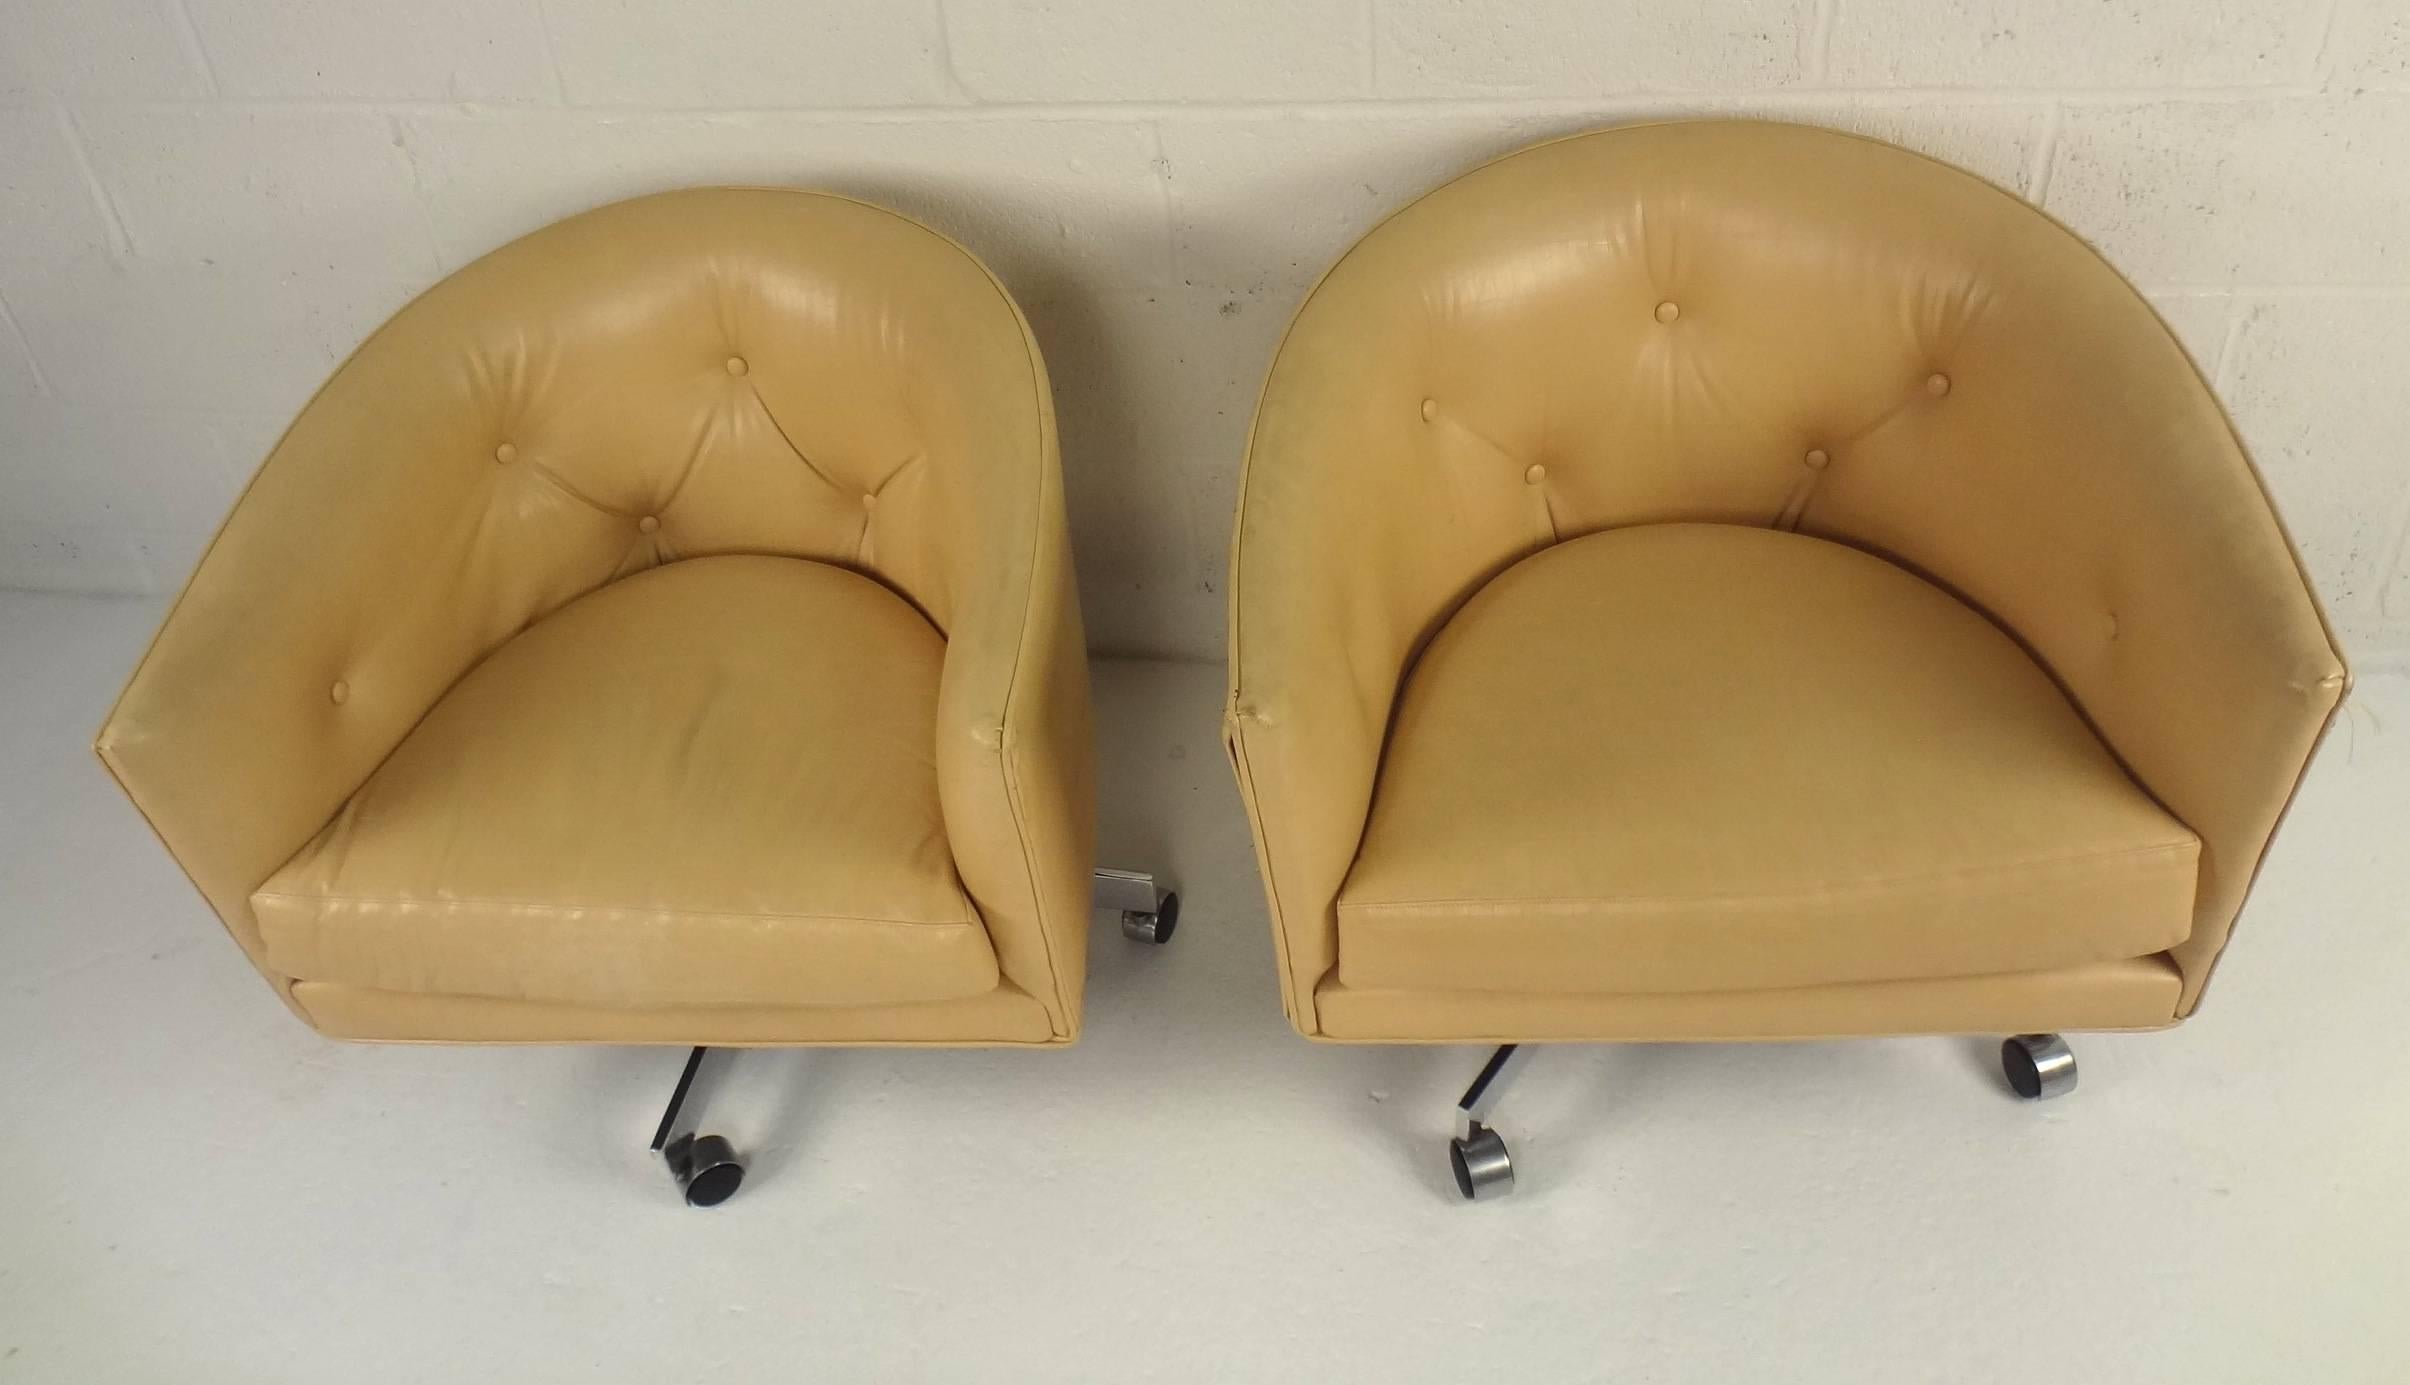 This beautiful pair of vintage lounge chairs by Milo Baughman feature the ability to swivel and have a super supportive wraparound barrel backrest. Sleek design with a subtle embossed gatorskin on the faux leather covering and wide seating. A chrome